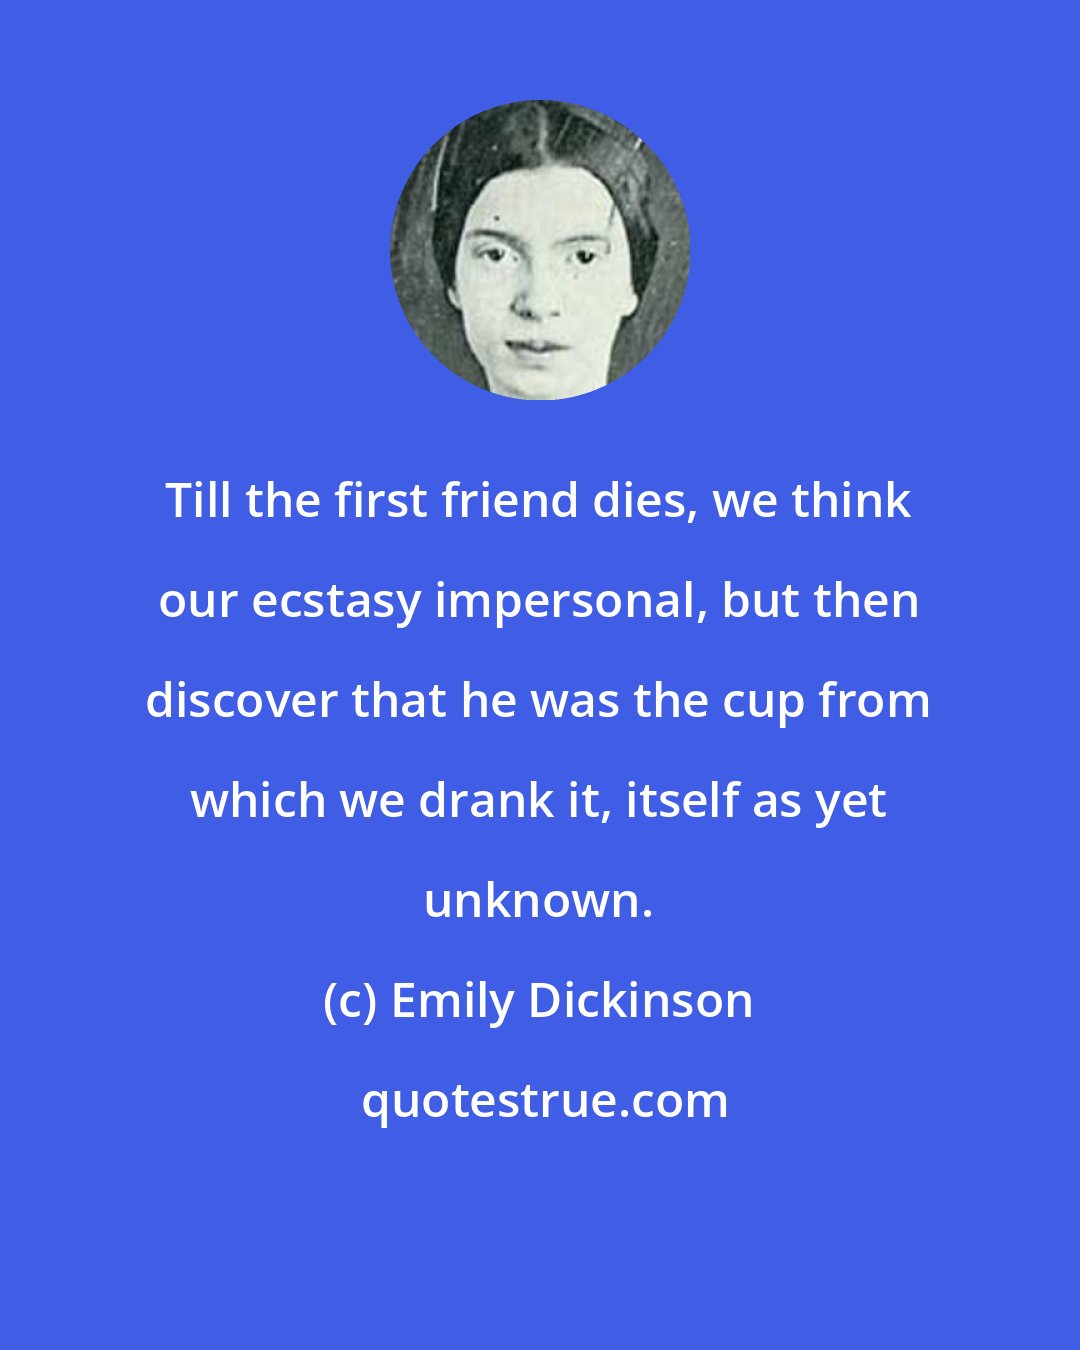 Emily Dickinson: Till the first friend dies, we think our ecstasy impersonal, but then discover that he was the cup from which we drank it, itself as yet unknown.